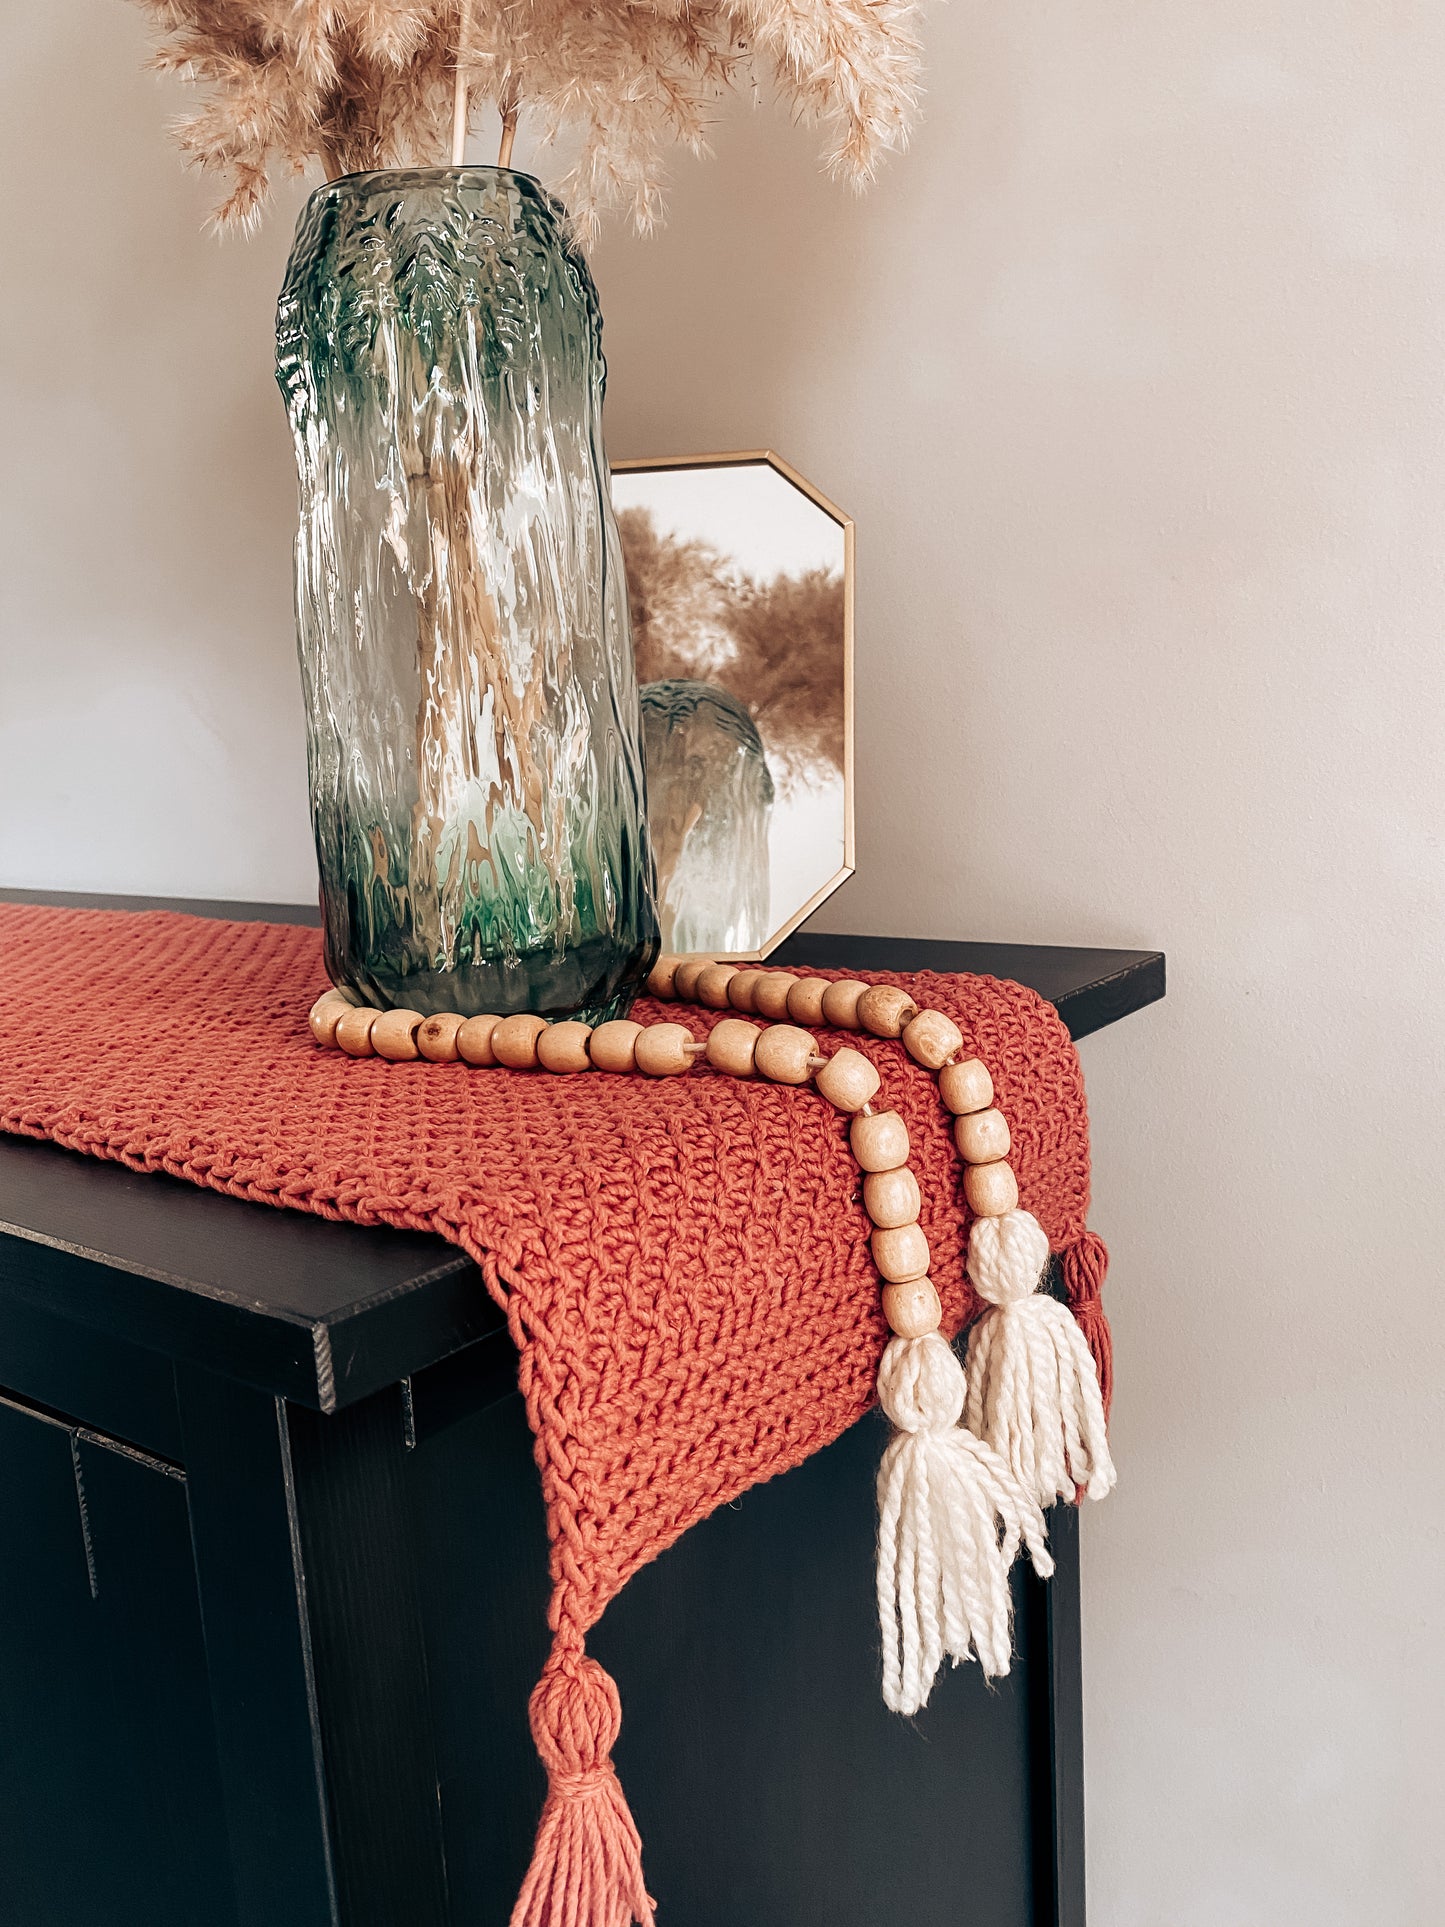 The vintage table runner